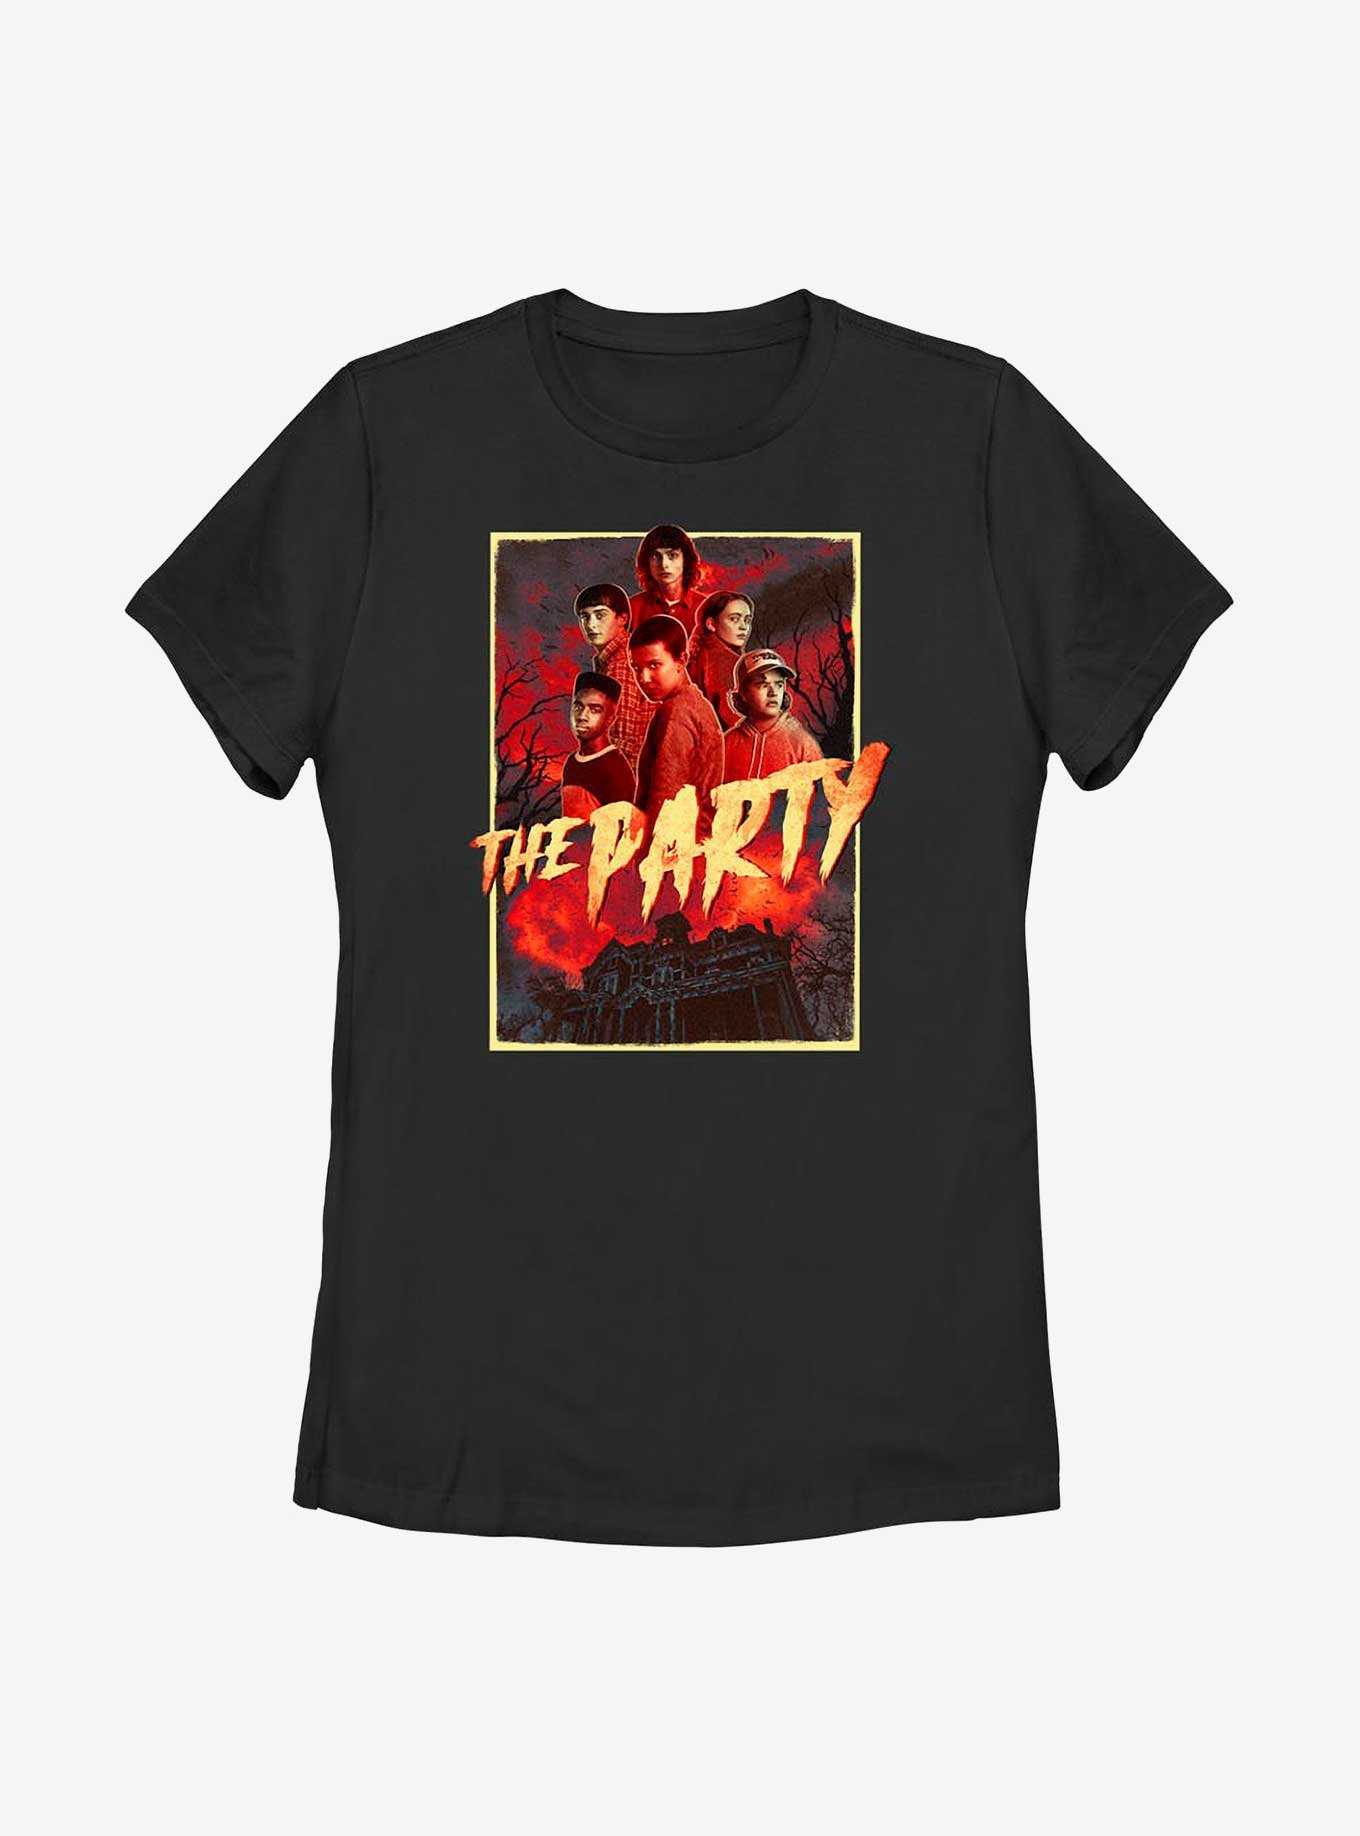 Stranger Things The Party Womens T-Shirt, , hi-res